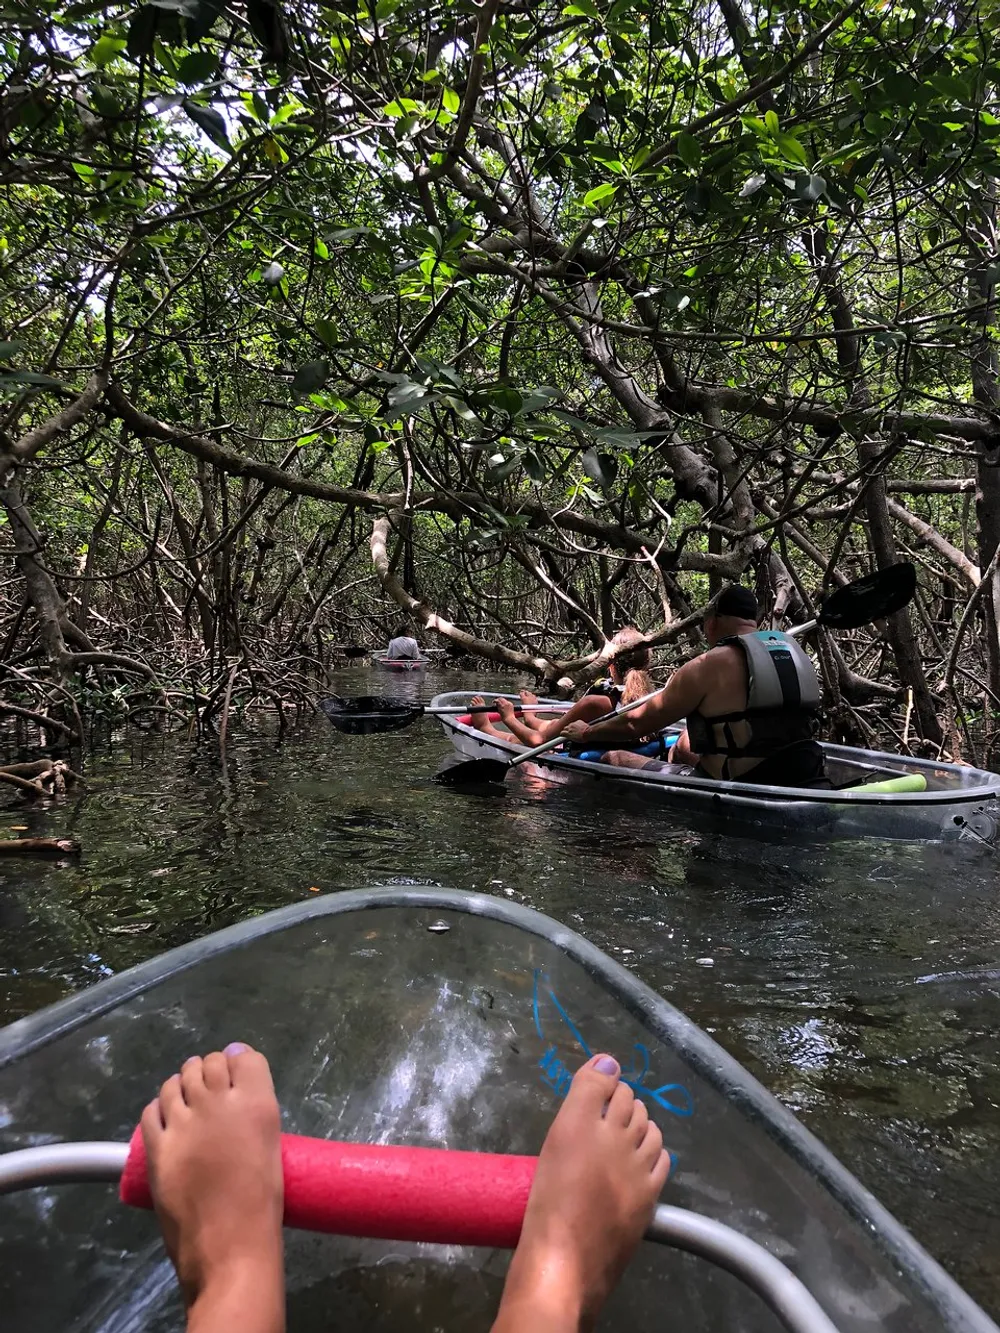 A group of people are kayaking through a dense mangrove forest viewed from the perspective of someone inside a transparent kayak